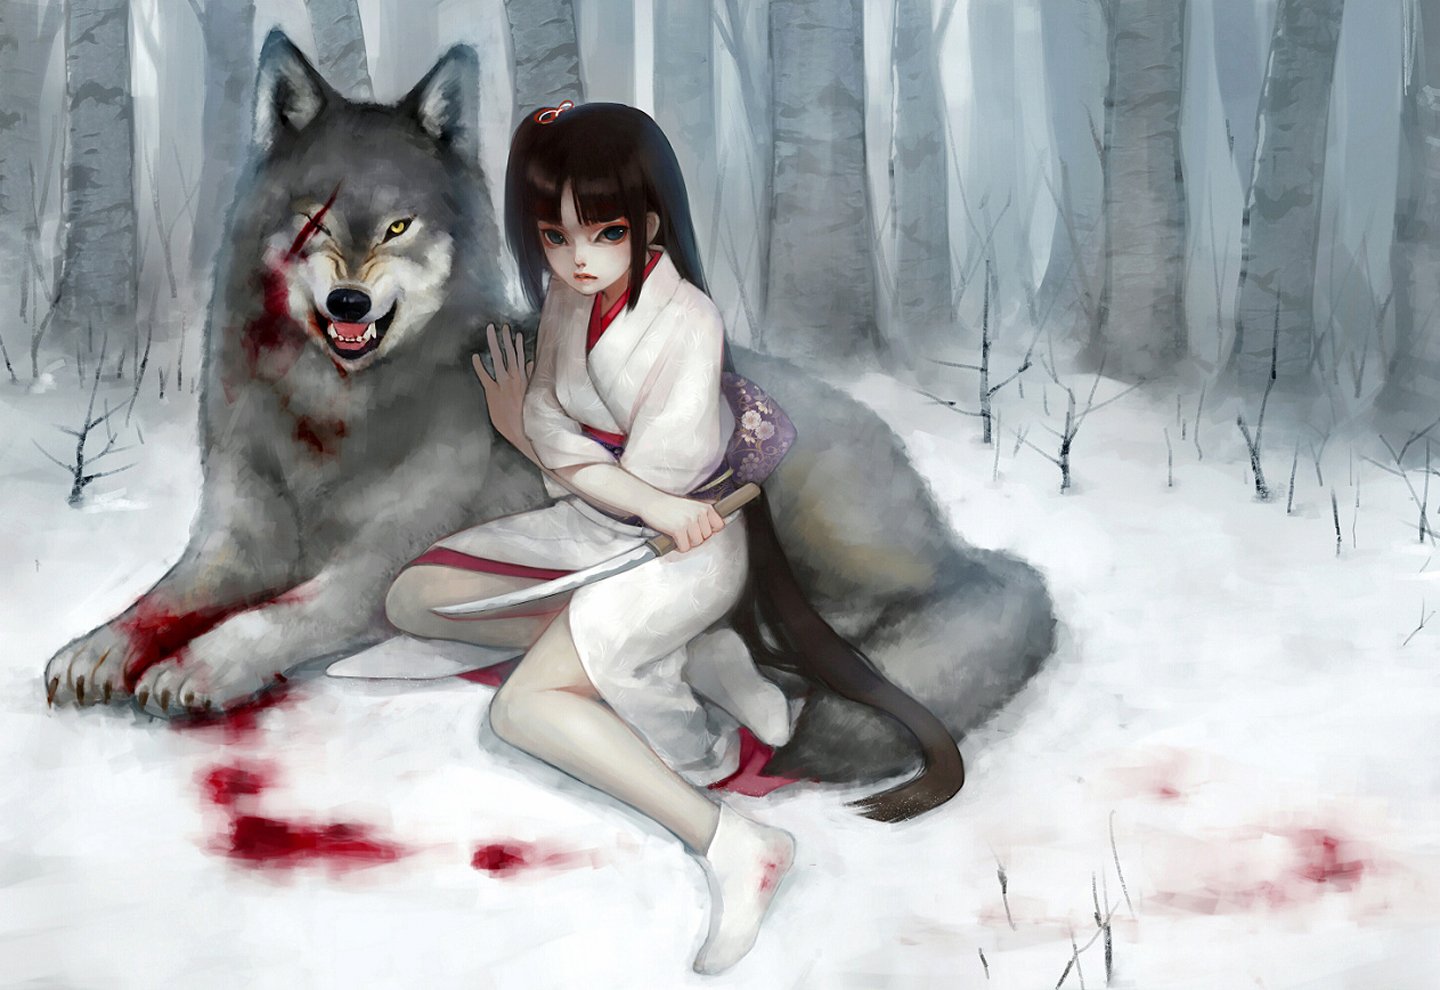 wolf, Girl, Long, Hair, Fantasy, Anime, Blood, Kimono, Knife, Forest, Snow  Wallpapers HD / Desktop and Mobile Backgrounds